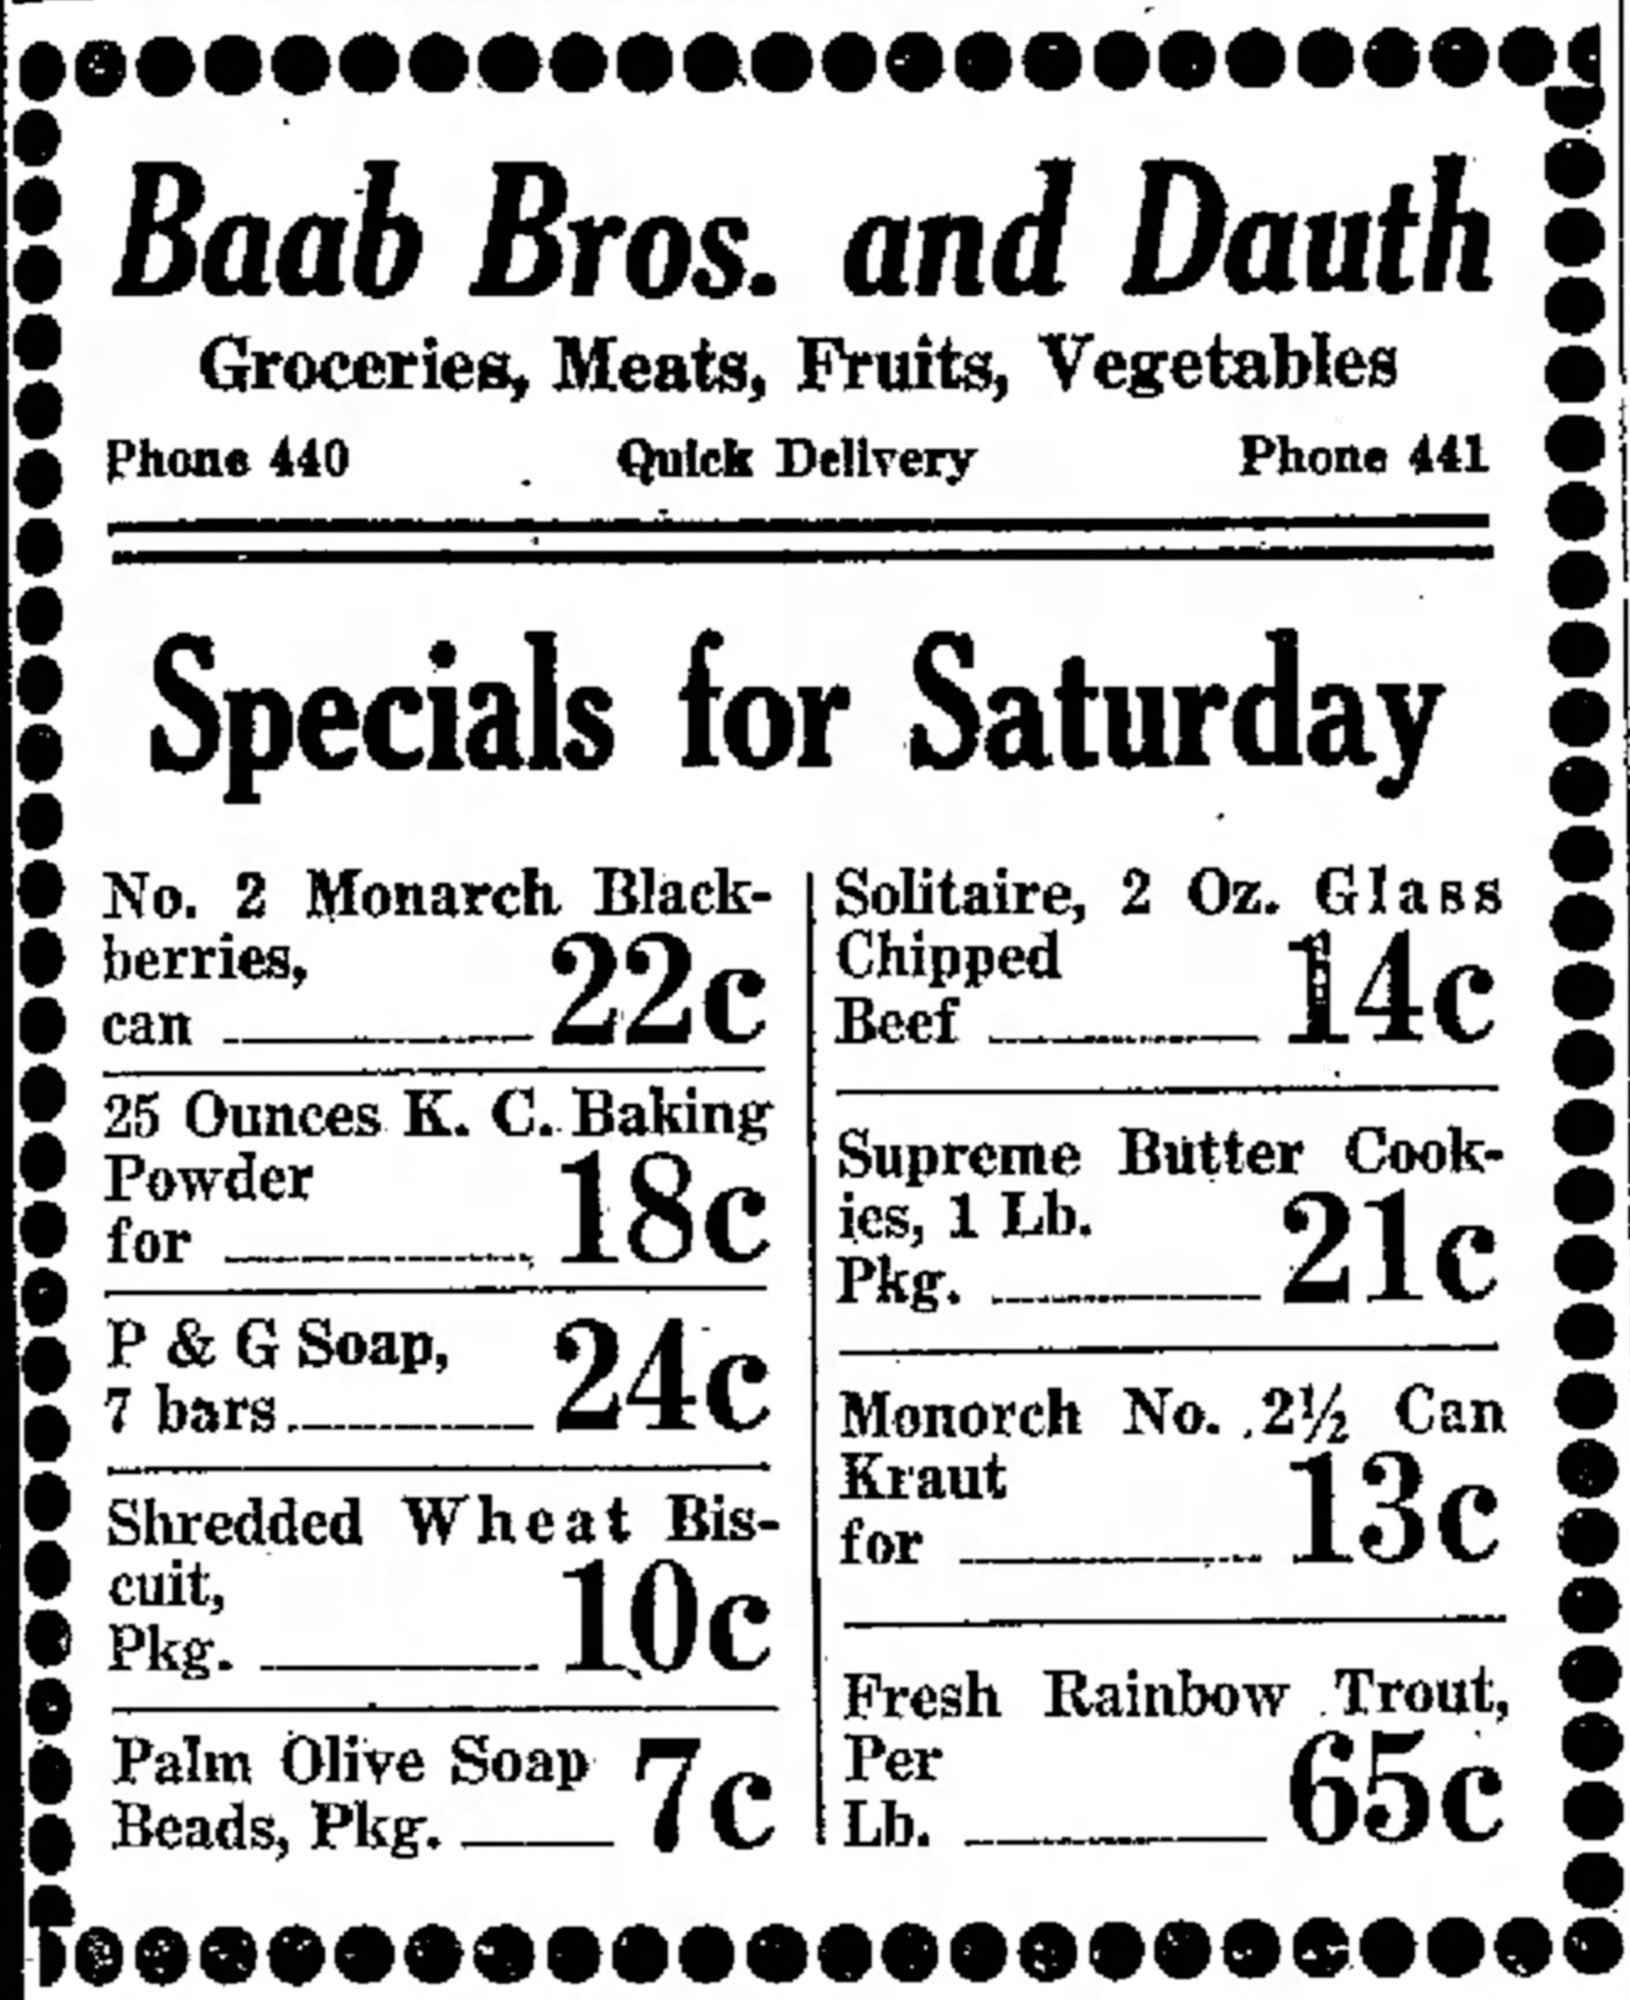 Dauth Family Archive - 1931-09-11 - Greeley Daily Tribune - Baab Bros and Dauth Advertisement